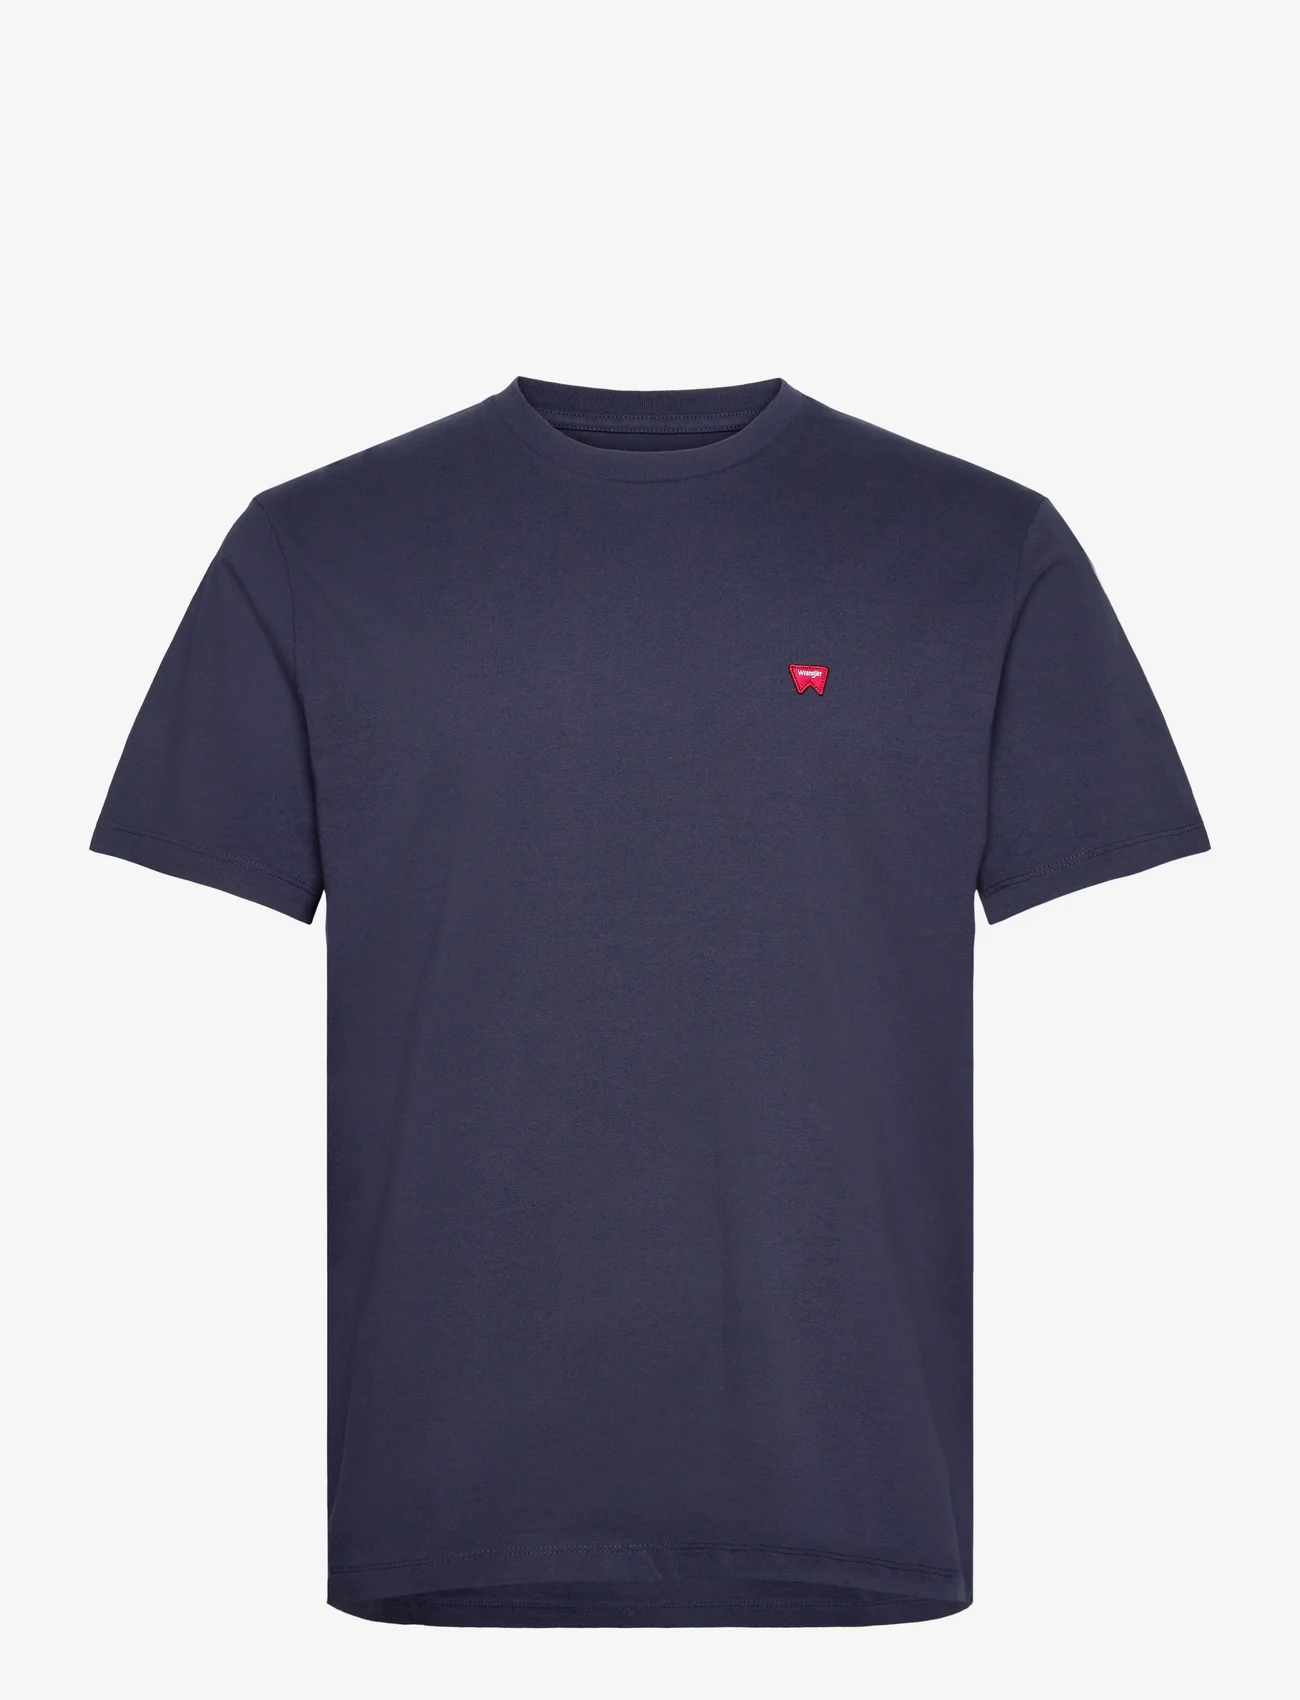 Wrangler - SIGN OFF TEE - lowest prices - navy - 0